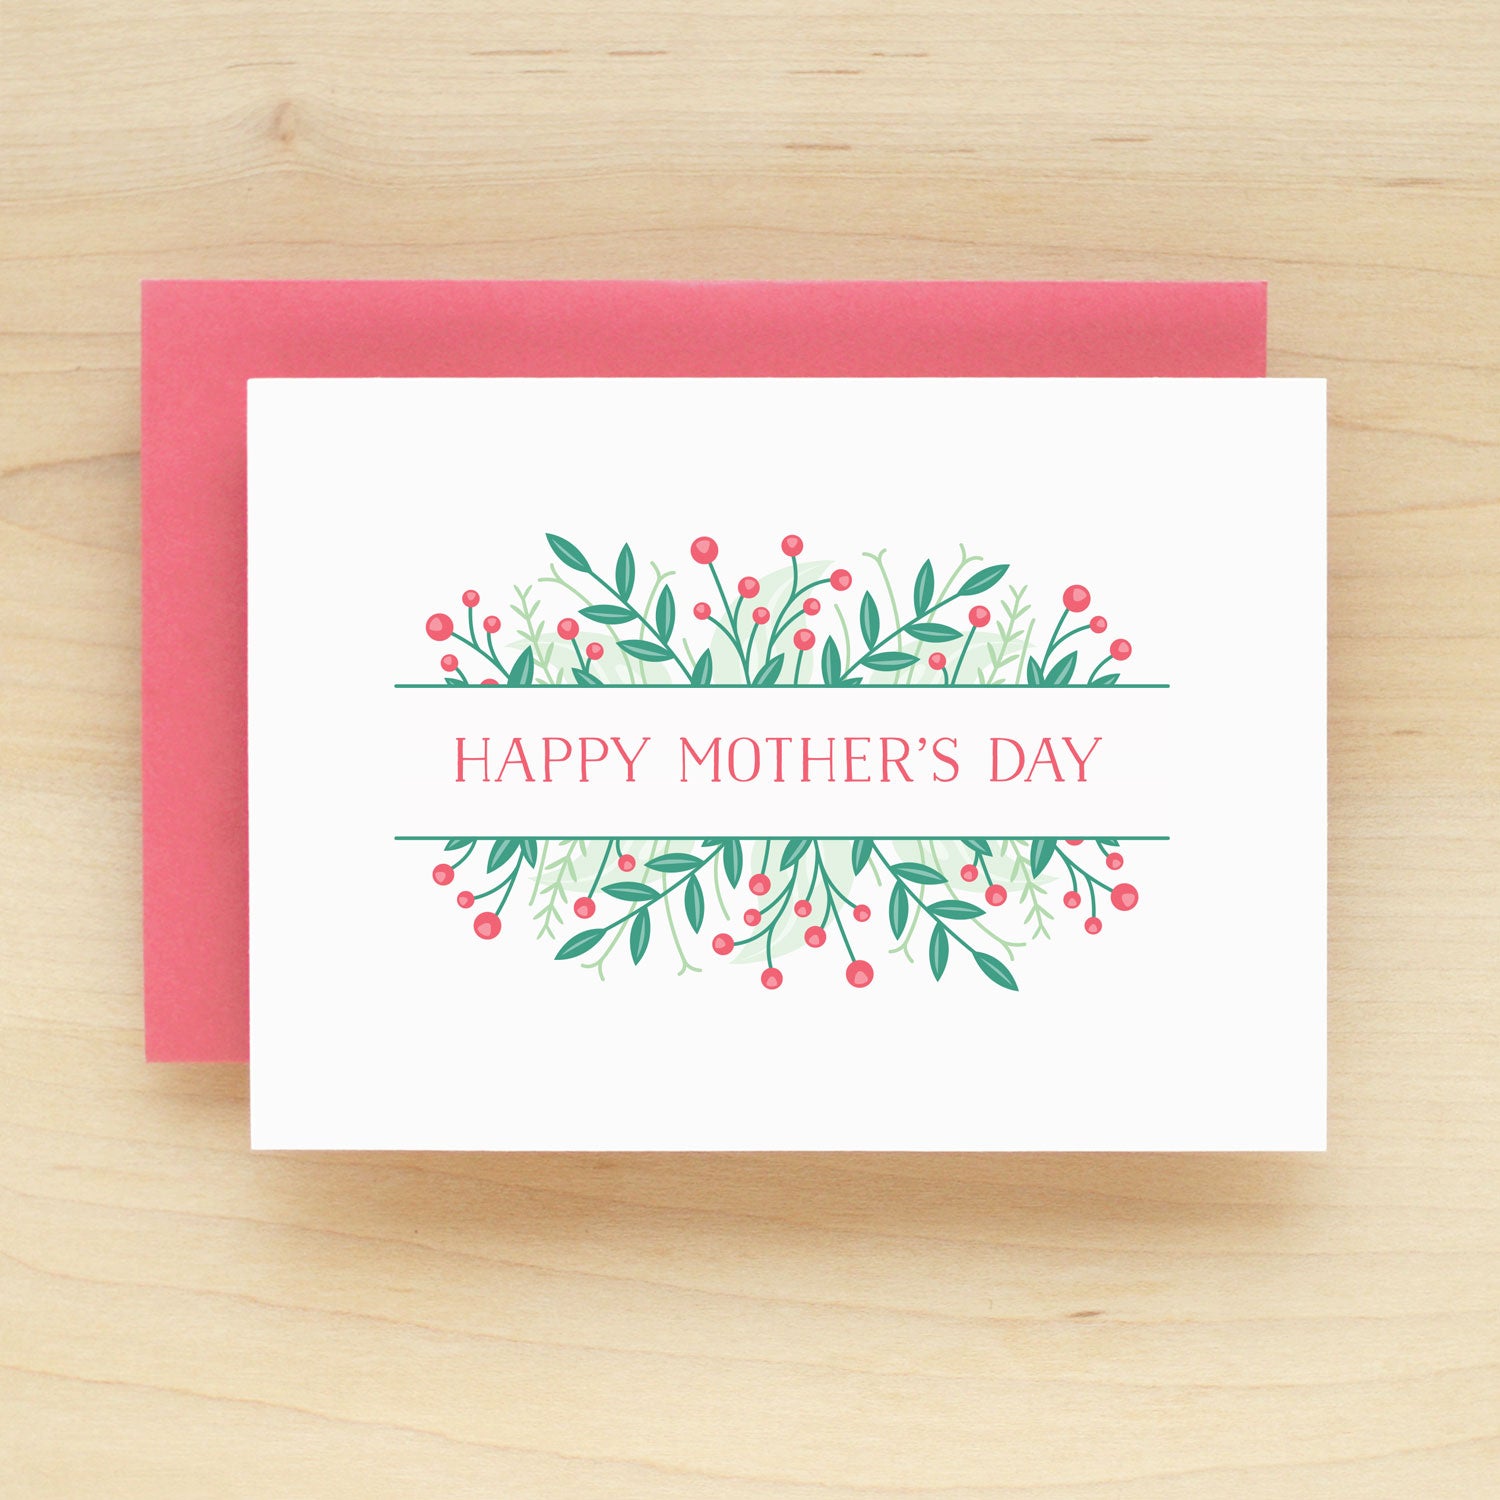 "Happy Mother's Day" Wildflower Mother Greeting Card #259